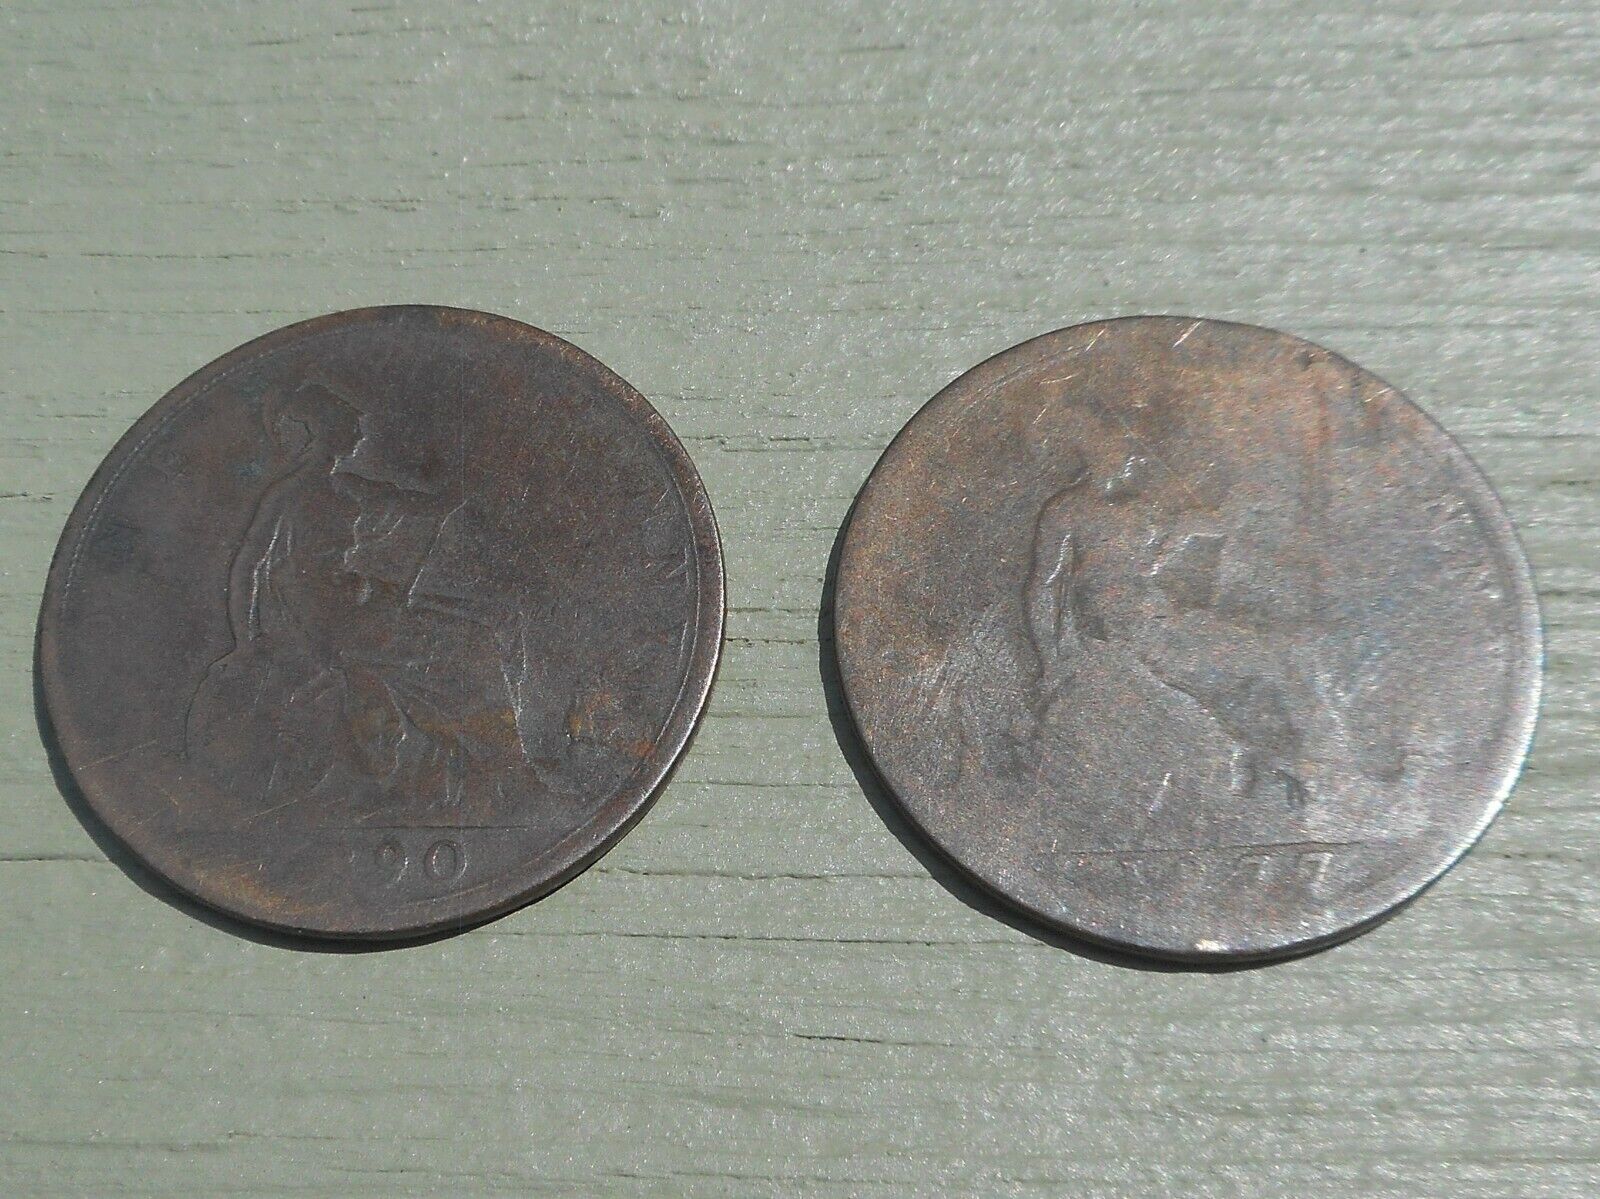 1877 & 1890 LOT OF 2 COINS BRITAIN One Penny 1 Pence Cent Queen Victoria Без бренда - фотография #9